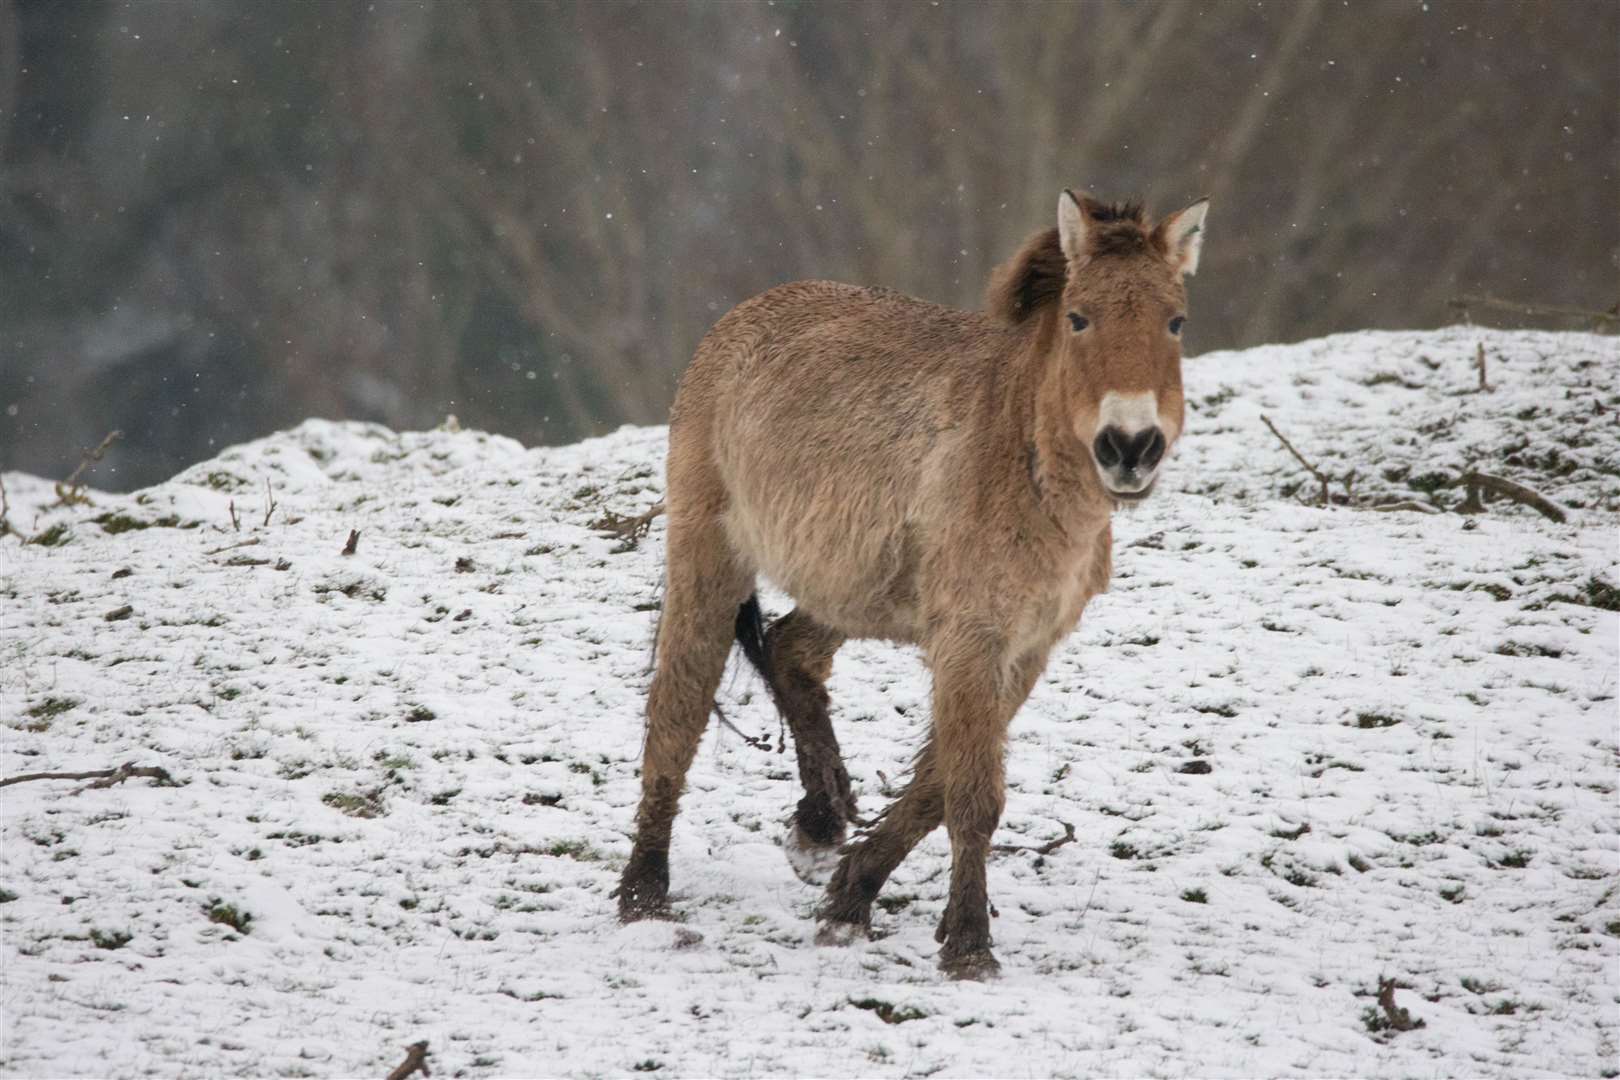 Port Lympne shared these photos of their animals in the snow. Picture: Port Lympne/David Rolfee